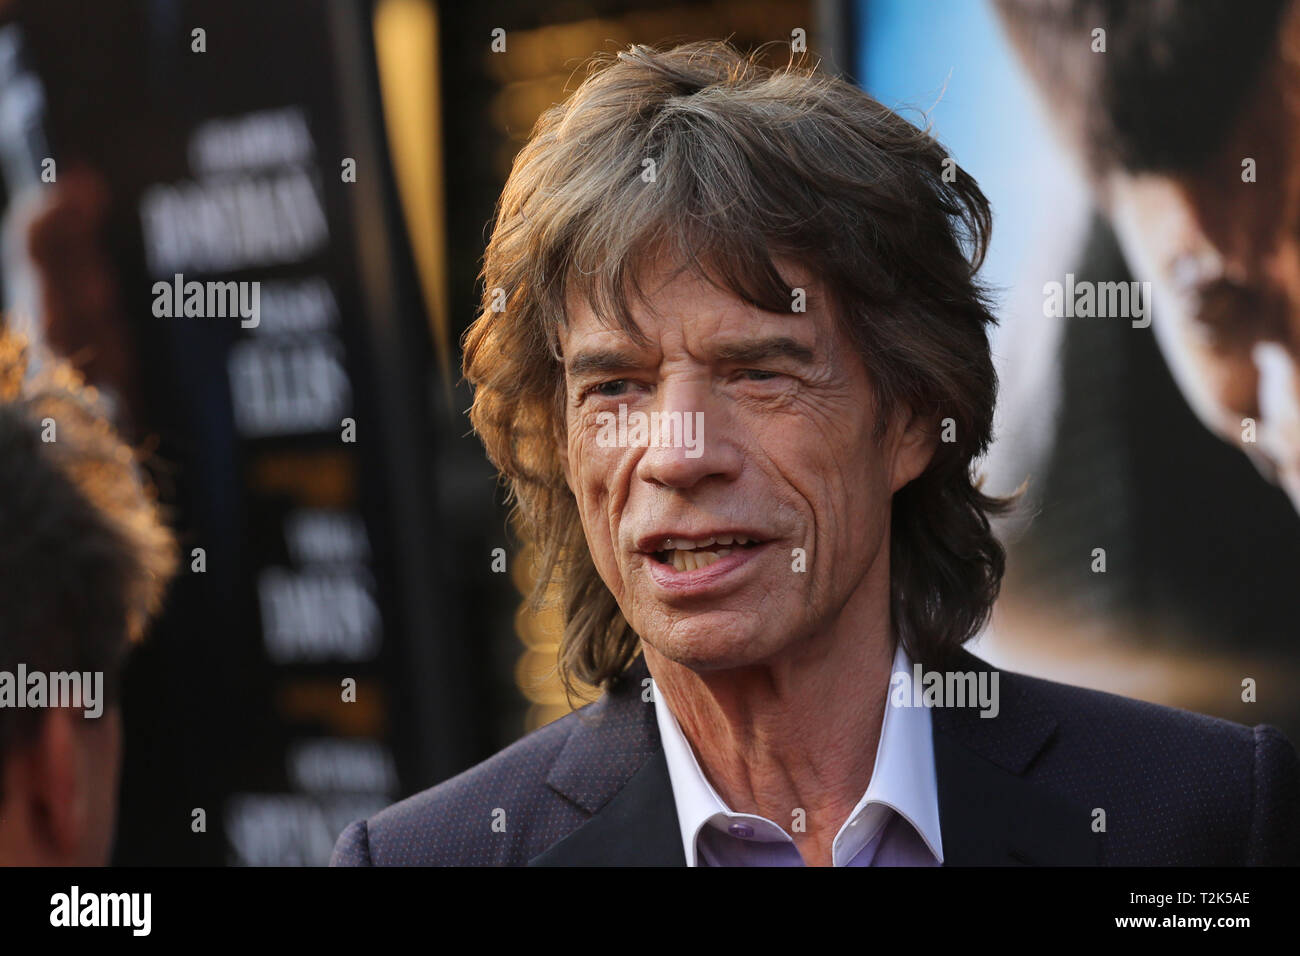 Musician Mick Jagger attends the 'Get On Up' premiere at The Apollo Theater on July 21, 2014 in New York City. Stock Photo